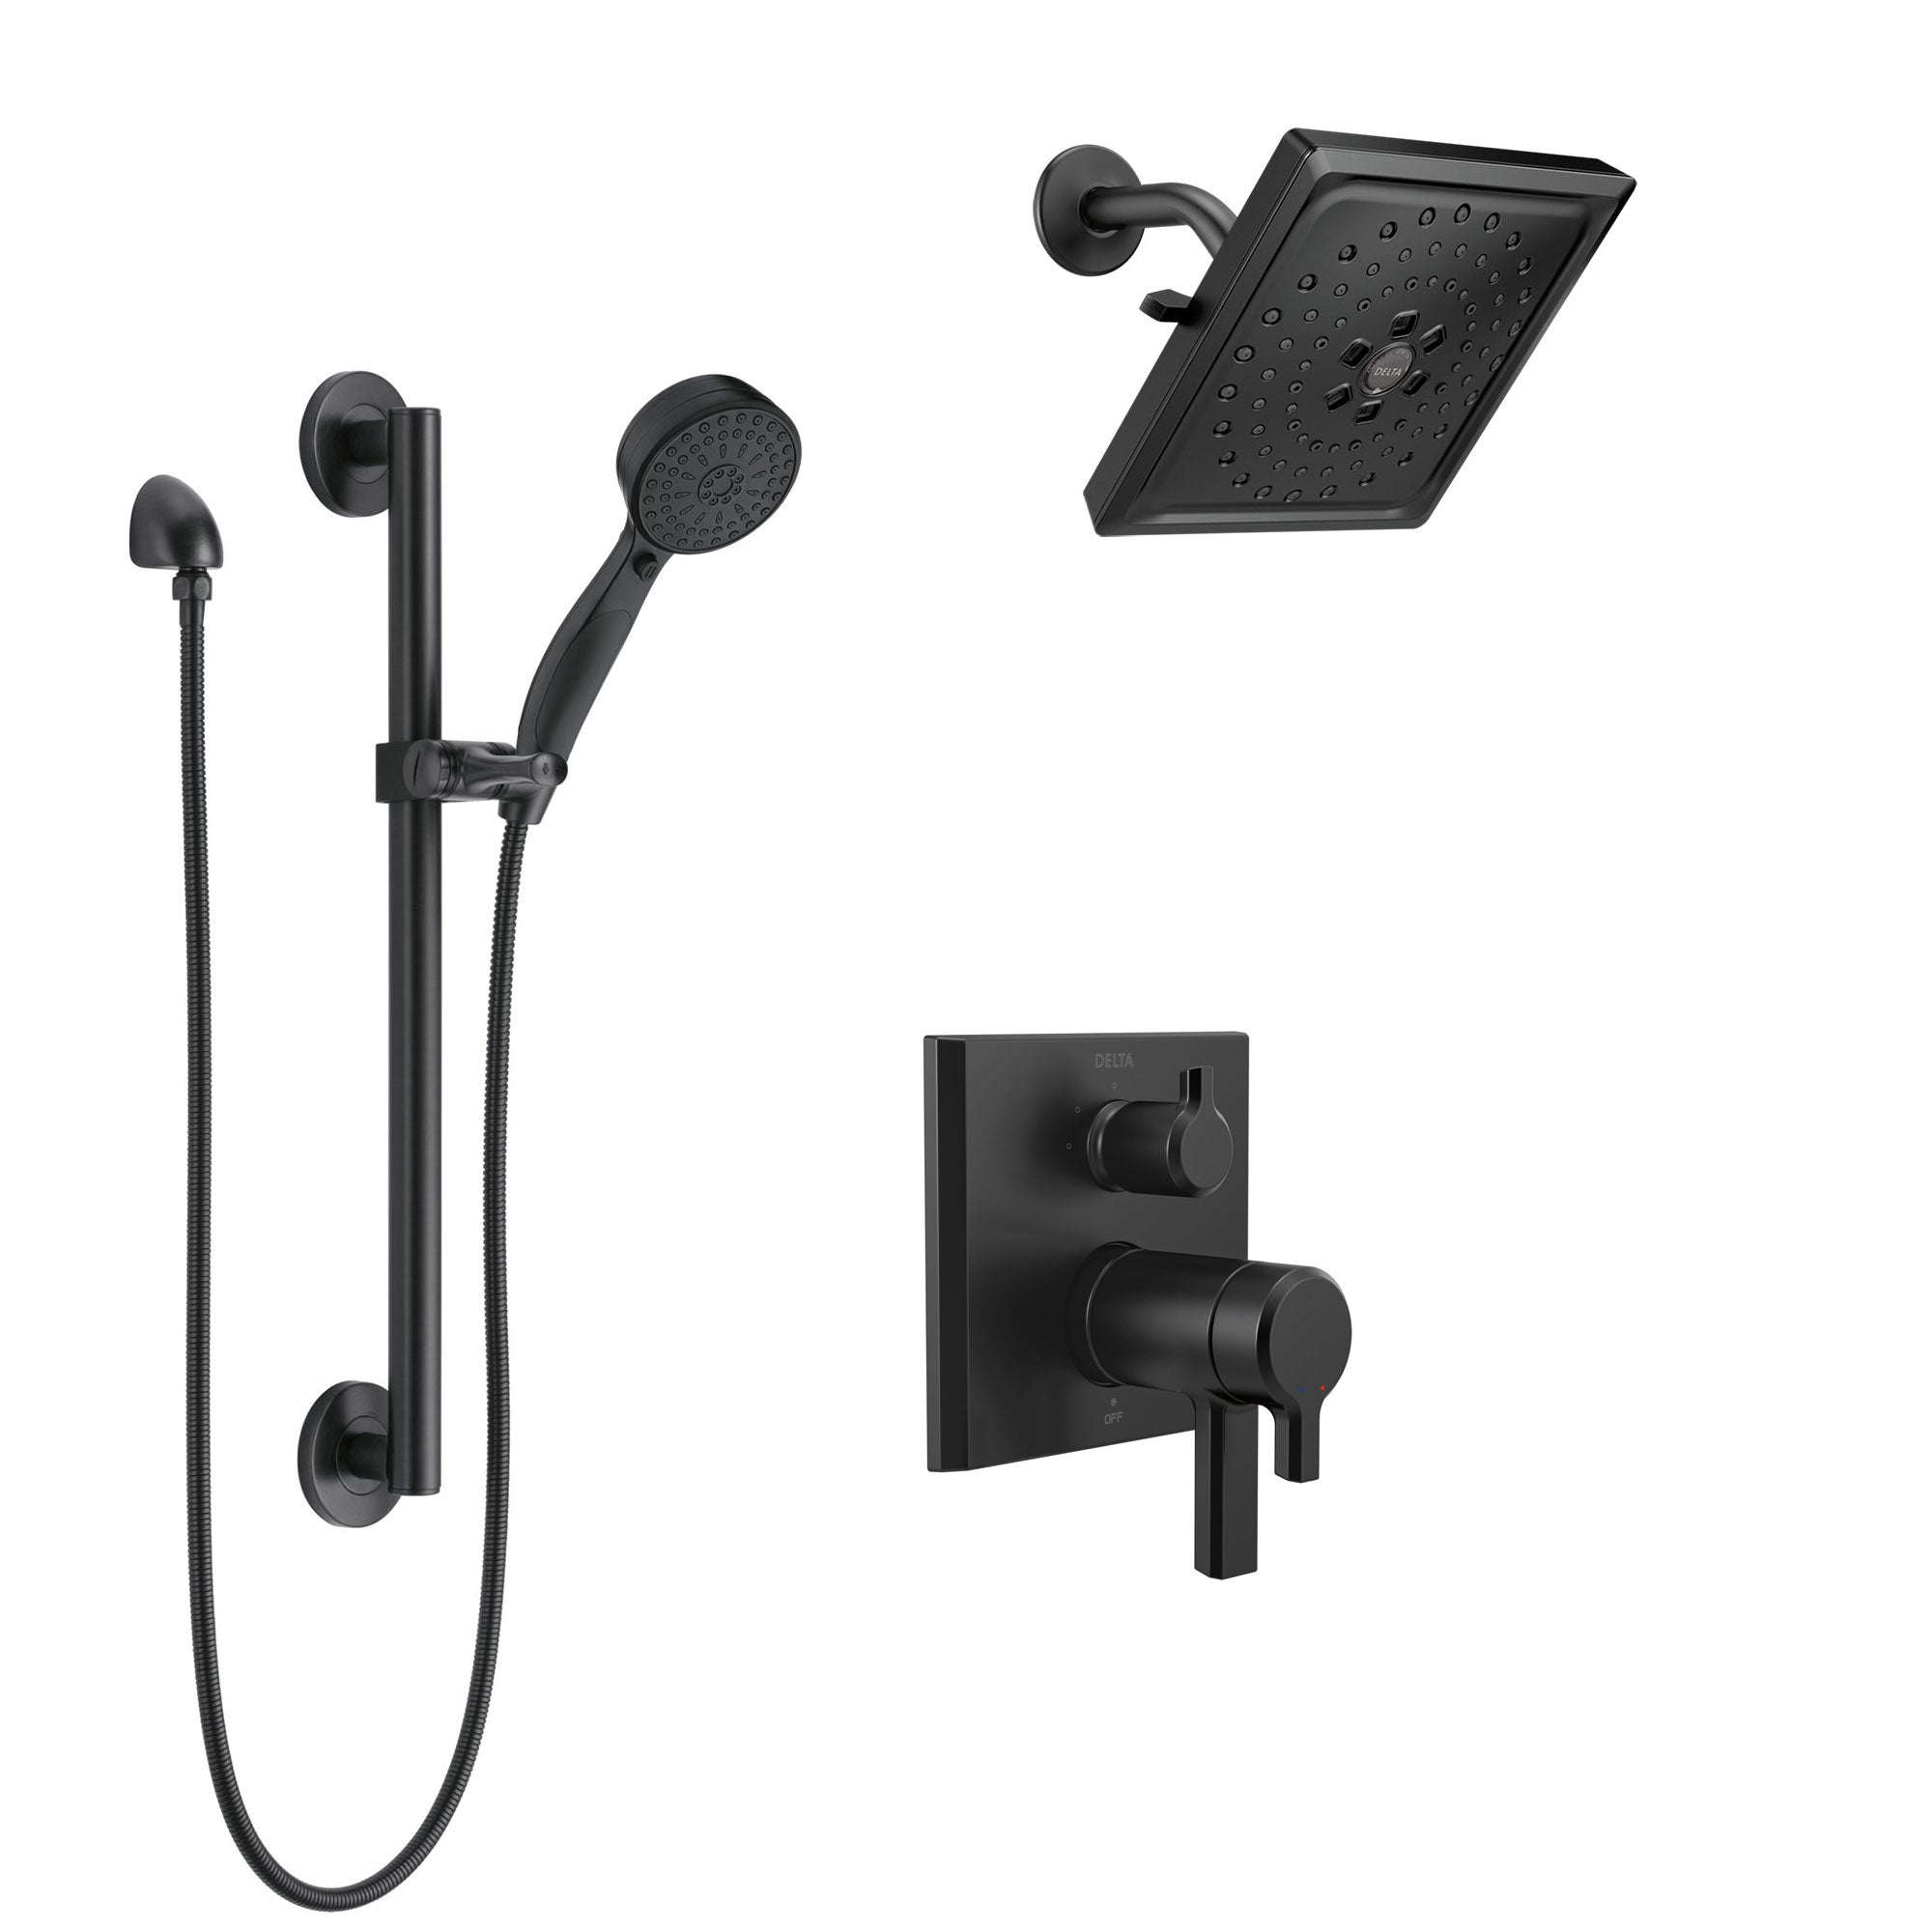 Delta Pivotal Matte Black Finish Thermostatic Shower System with Diverter, Multi-Setting Wall Showerhead, and Hand Shower on Grab Bar SS27T899BL5